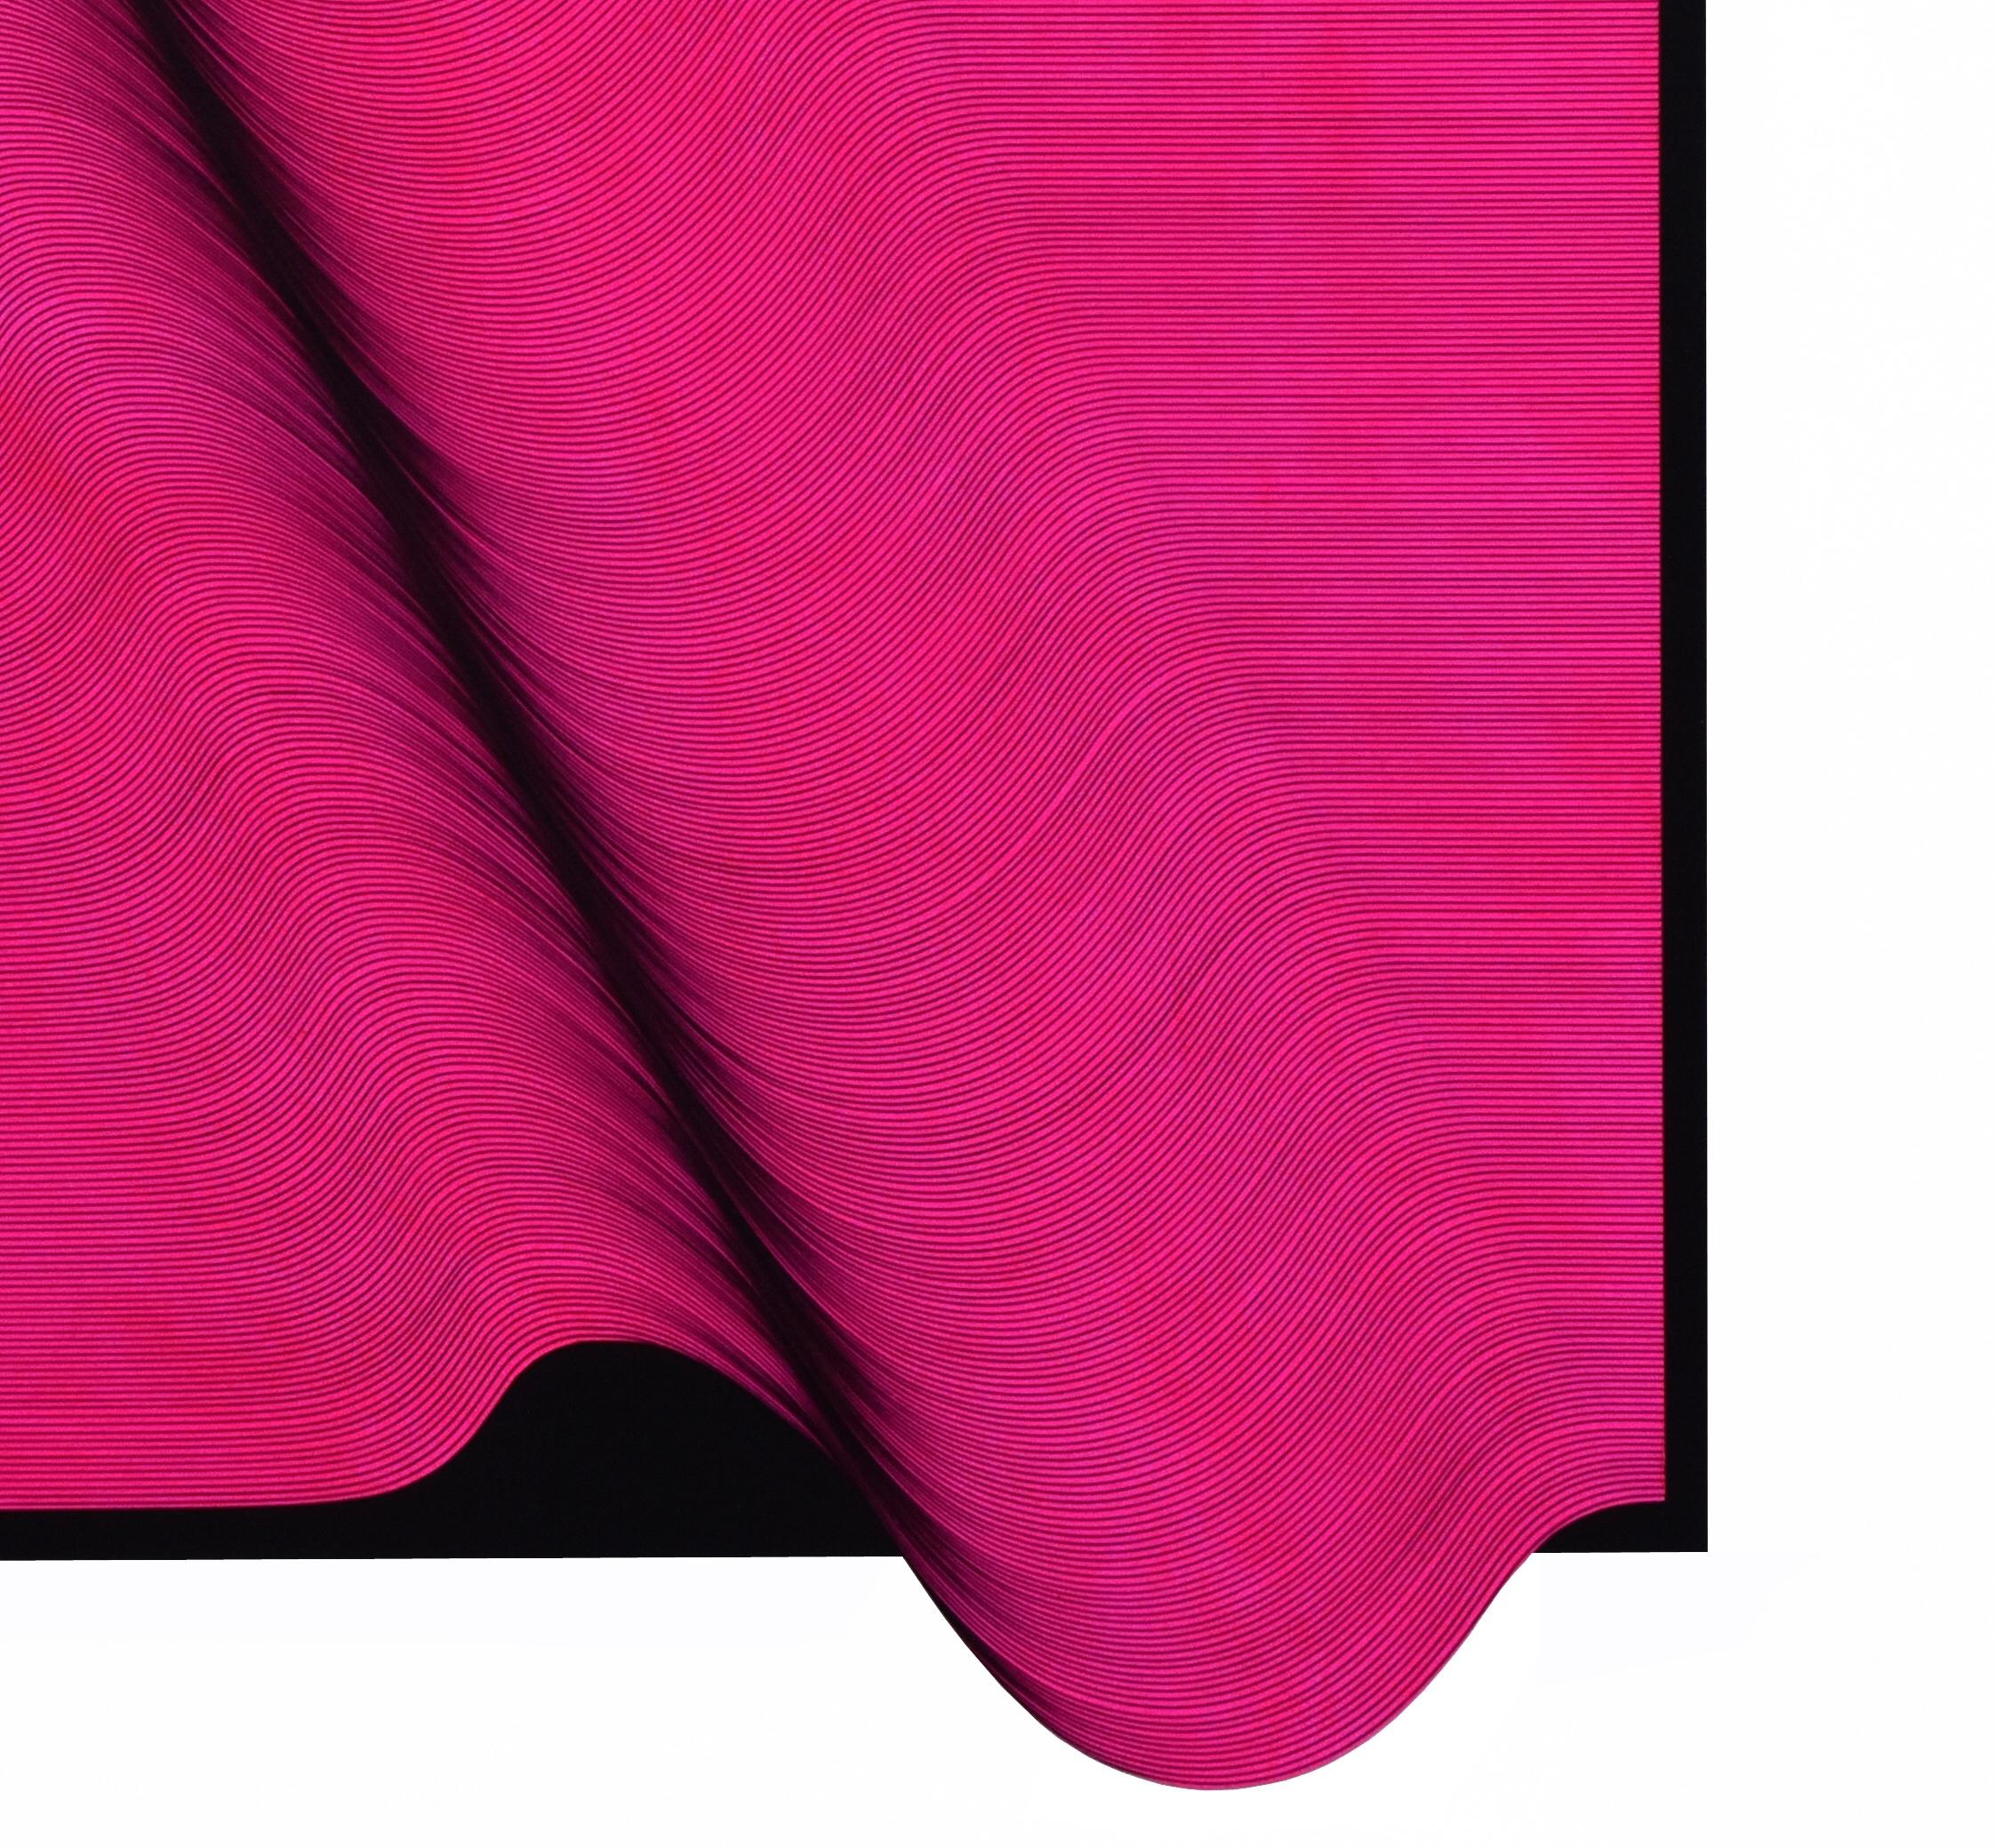 Pink Fluo Surface 2019 - abstract painting - Abstract Geometric Painting by Roberto Lucchetta